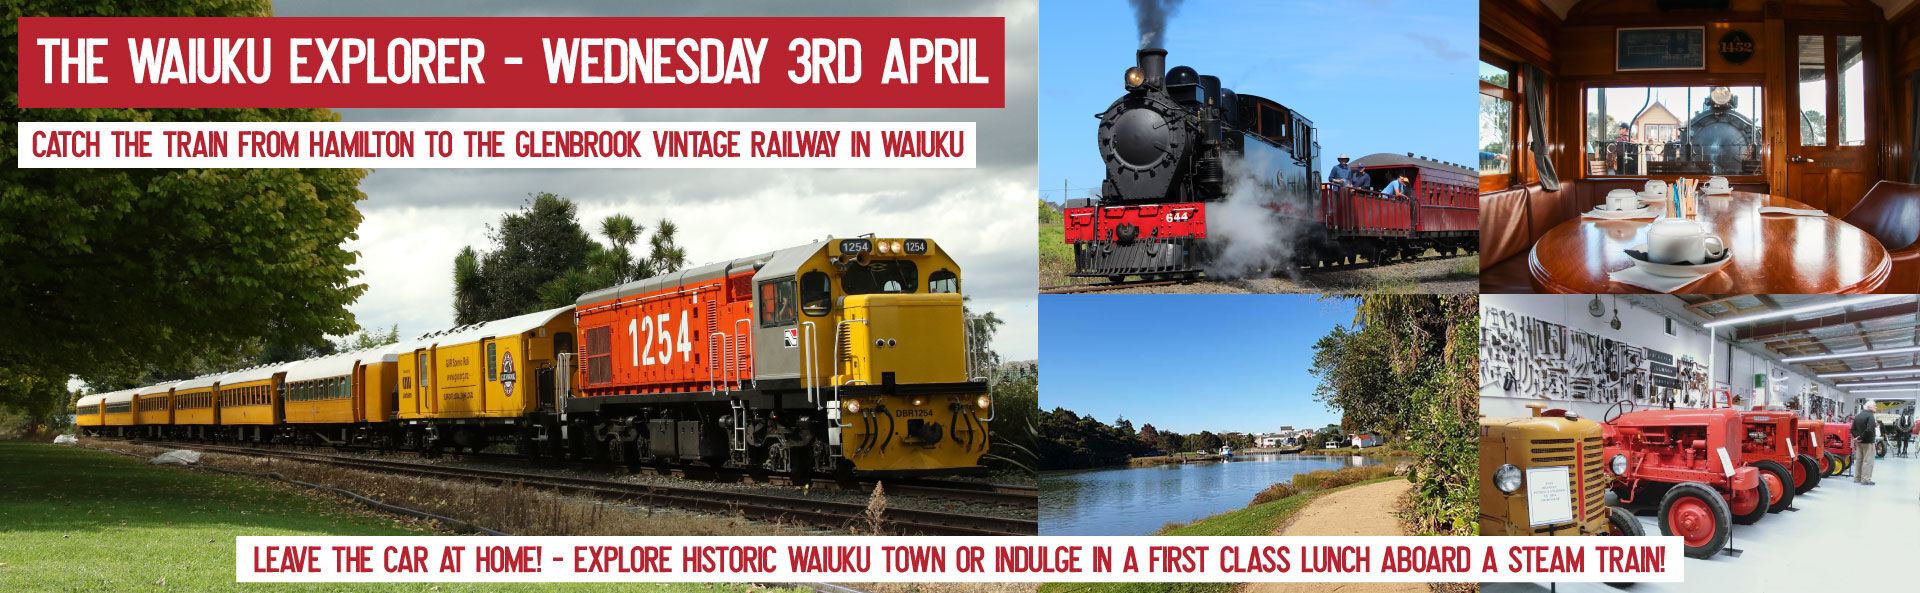 All aboard to for a trip north to the Glenbrook Vintage Railway where you will meet the steam train at Glenbrook Station and embark on one of three options!